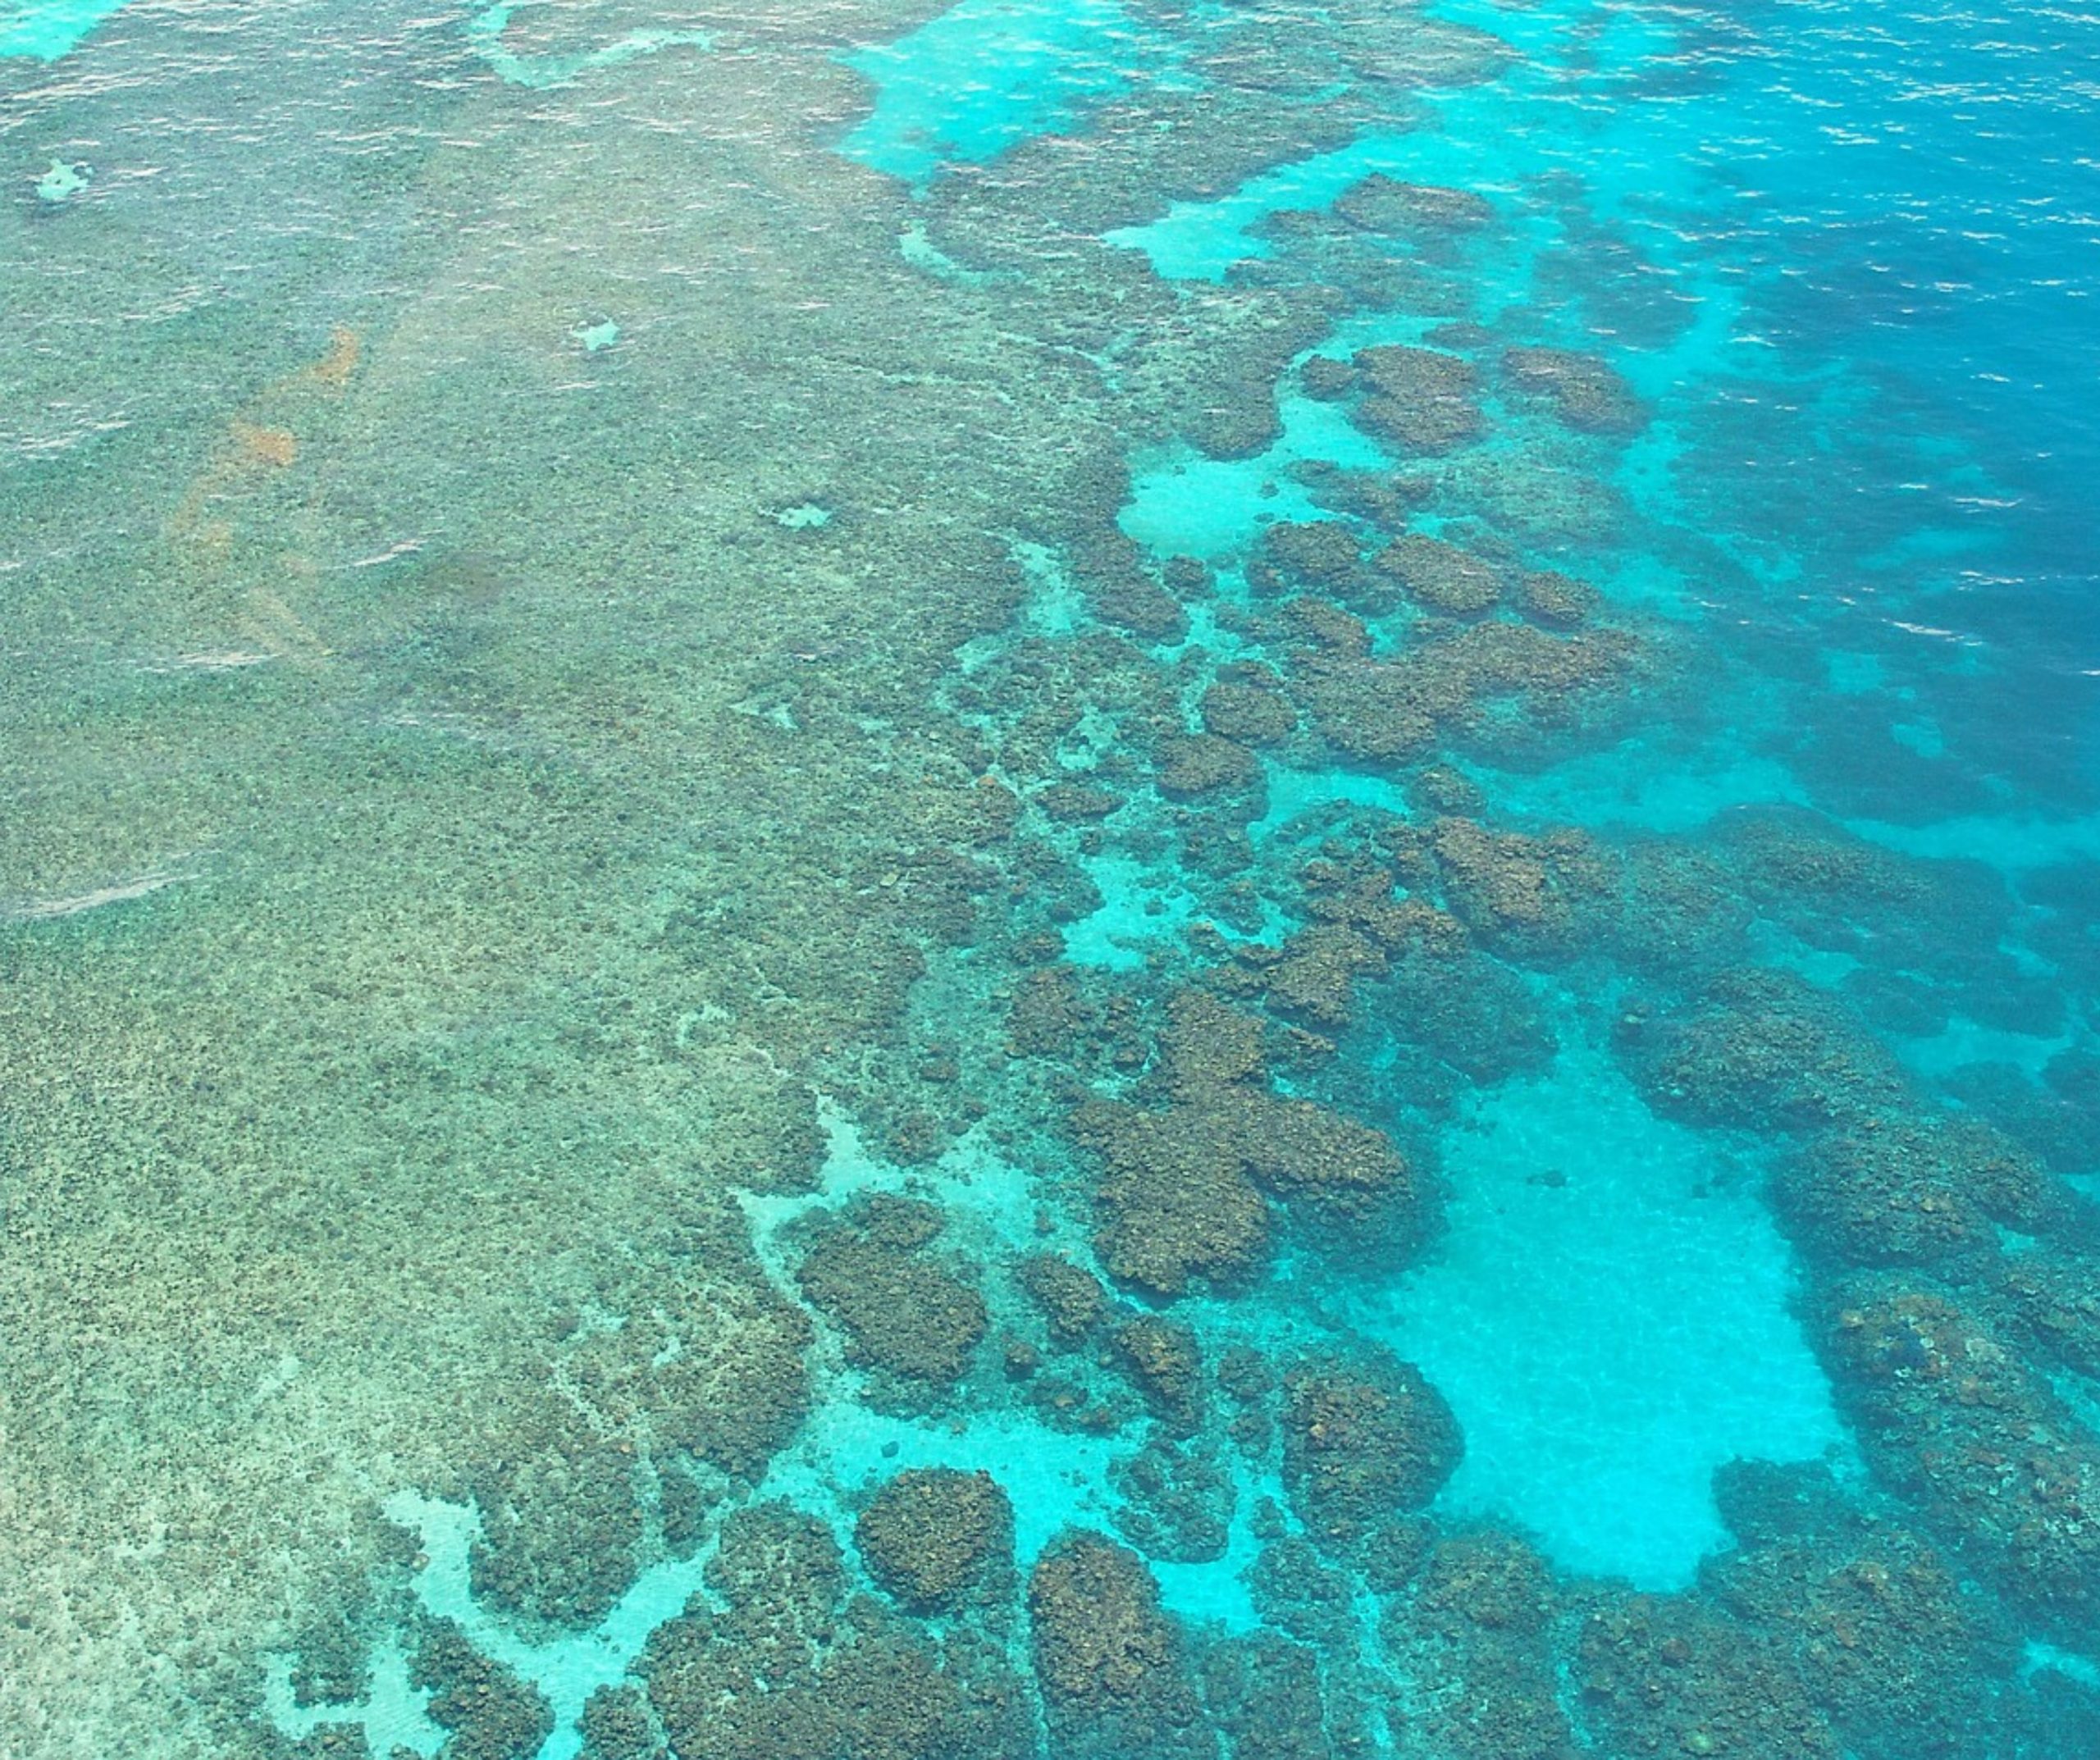 The UN leaves the GBR off the ‘in danger’ list again